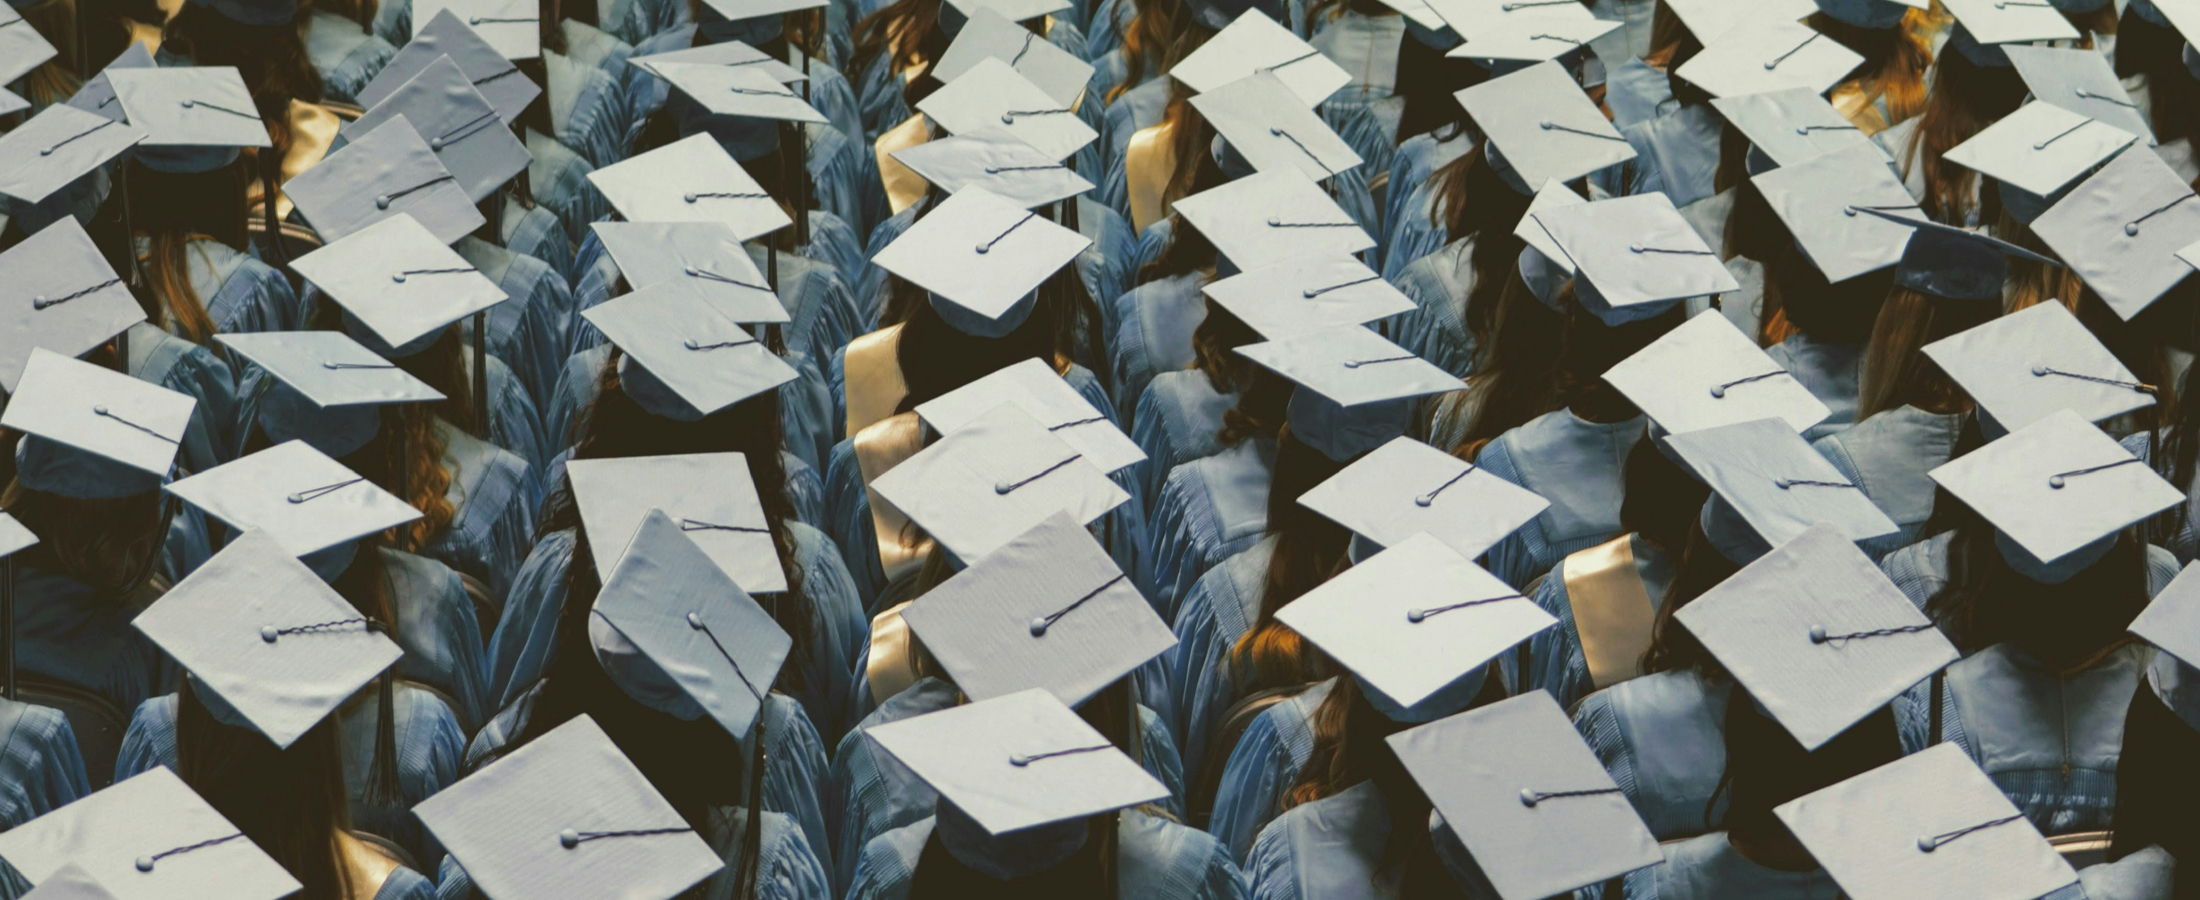 Graduation caps from above